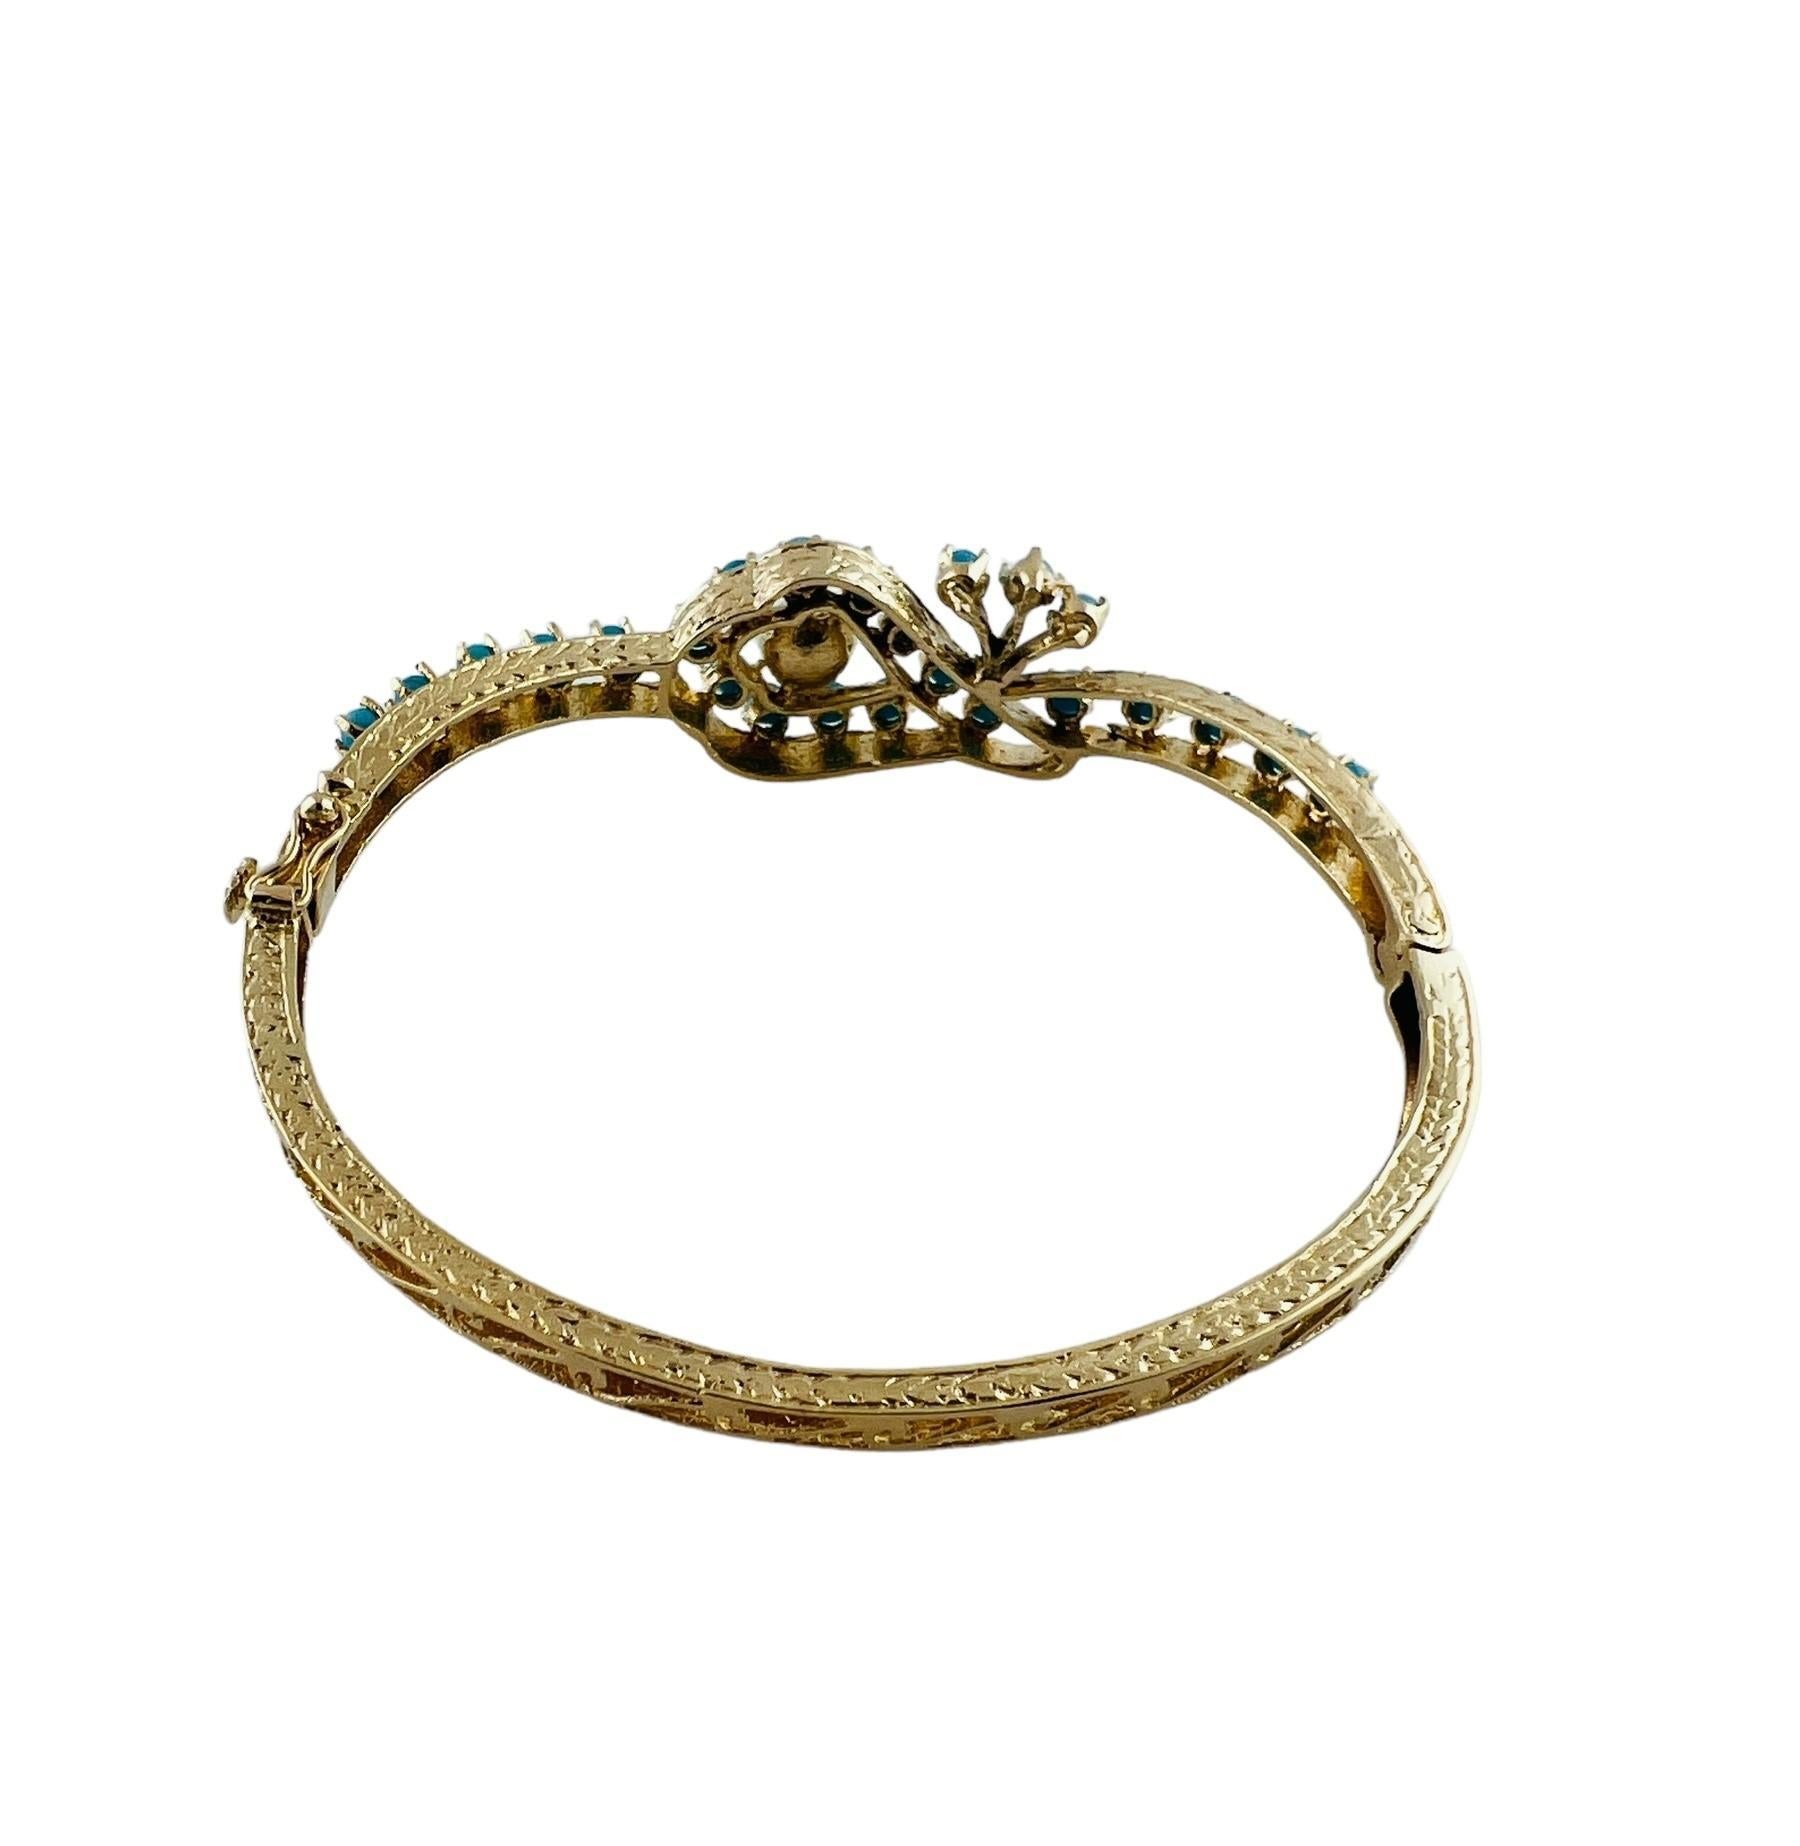 Vintage 18K Yellow Gold Pearl and Turquoise Bangle Bracelet

This ornate bracelet is set with 25 turquoise stones and 1 white pearl 

Turquoise stones are approx. 2mm in diameter and pearl is approx. 6 mm in diameter

Bracelet is approx. 6.5